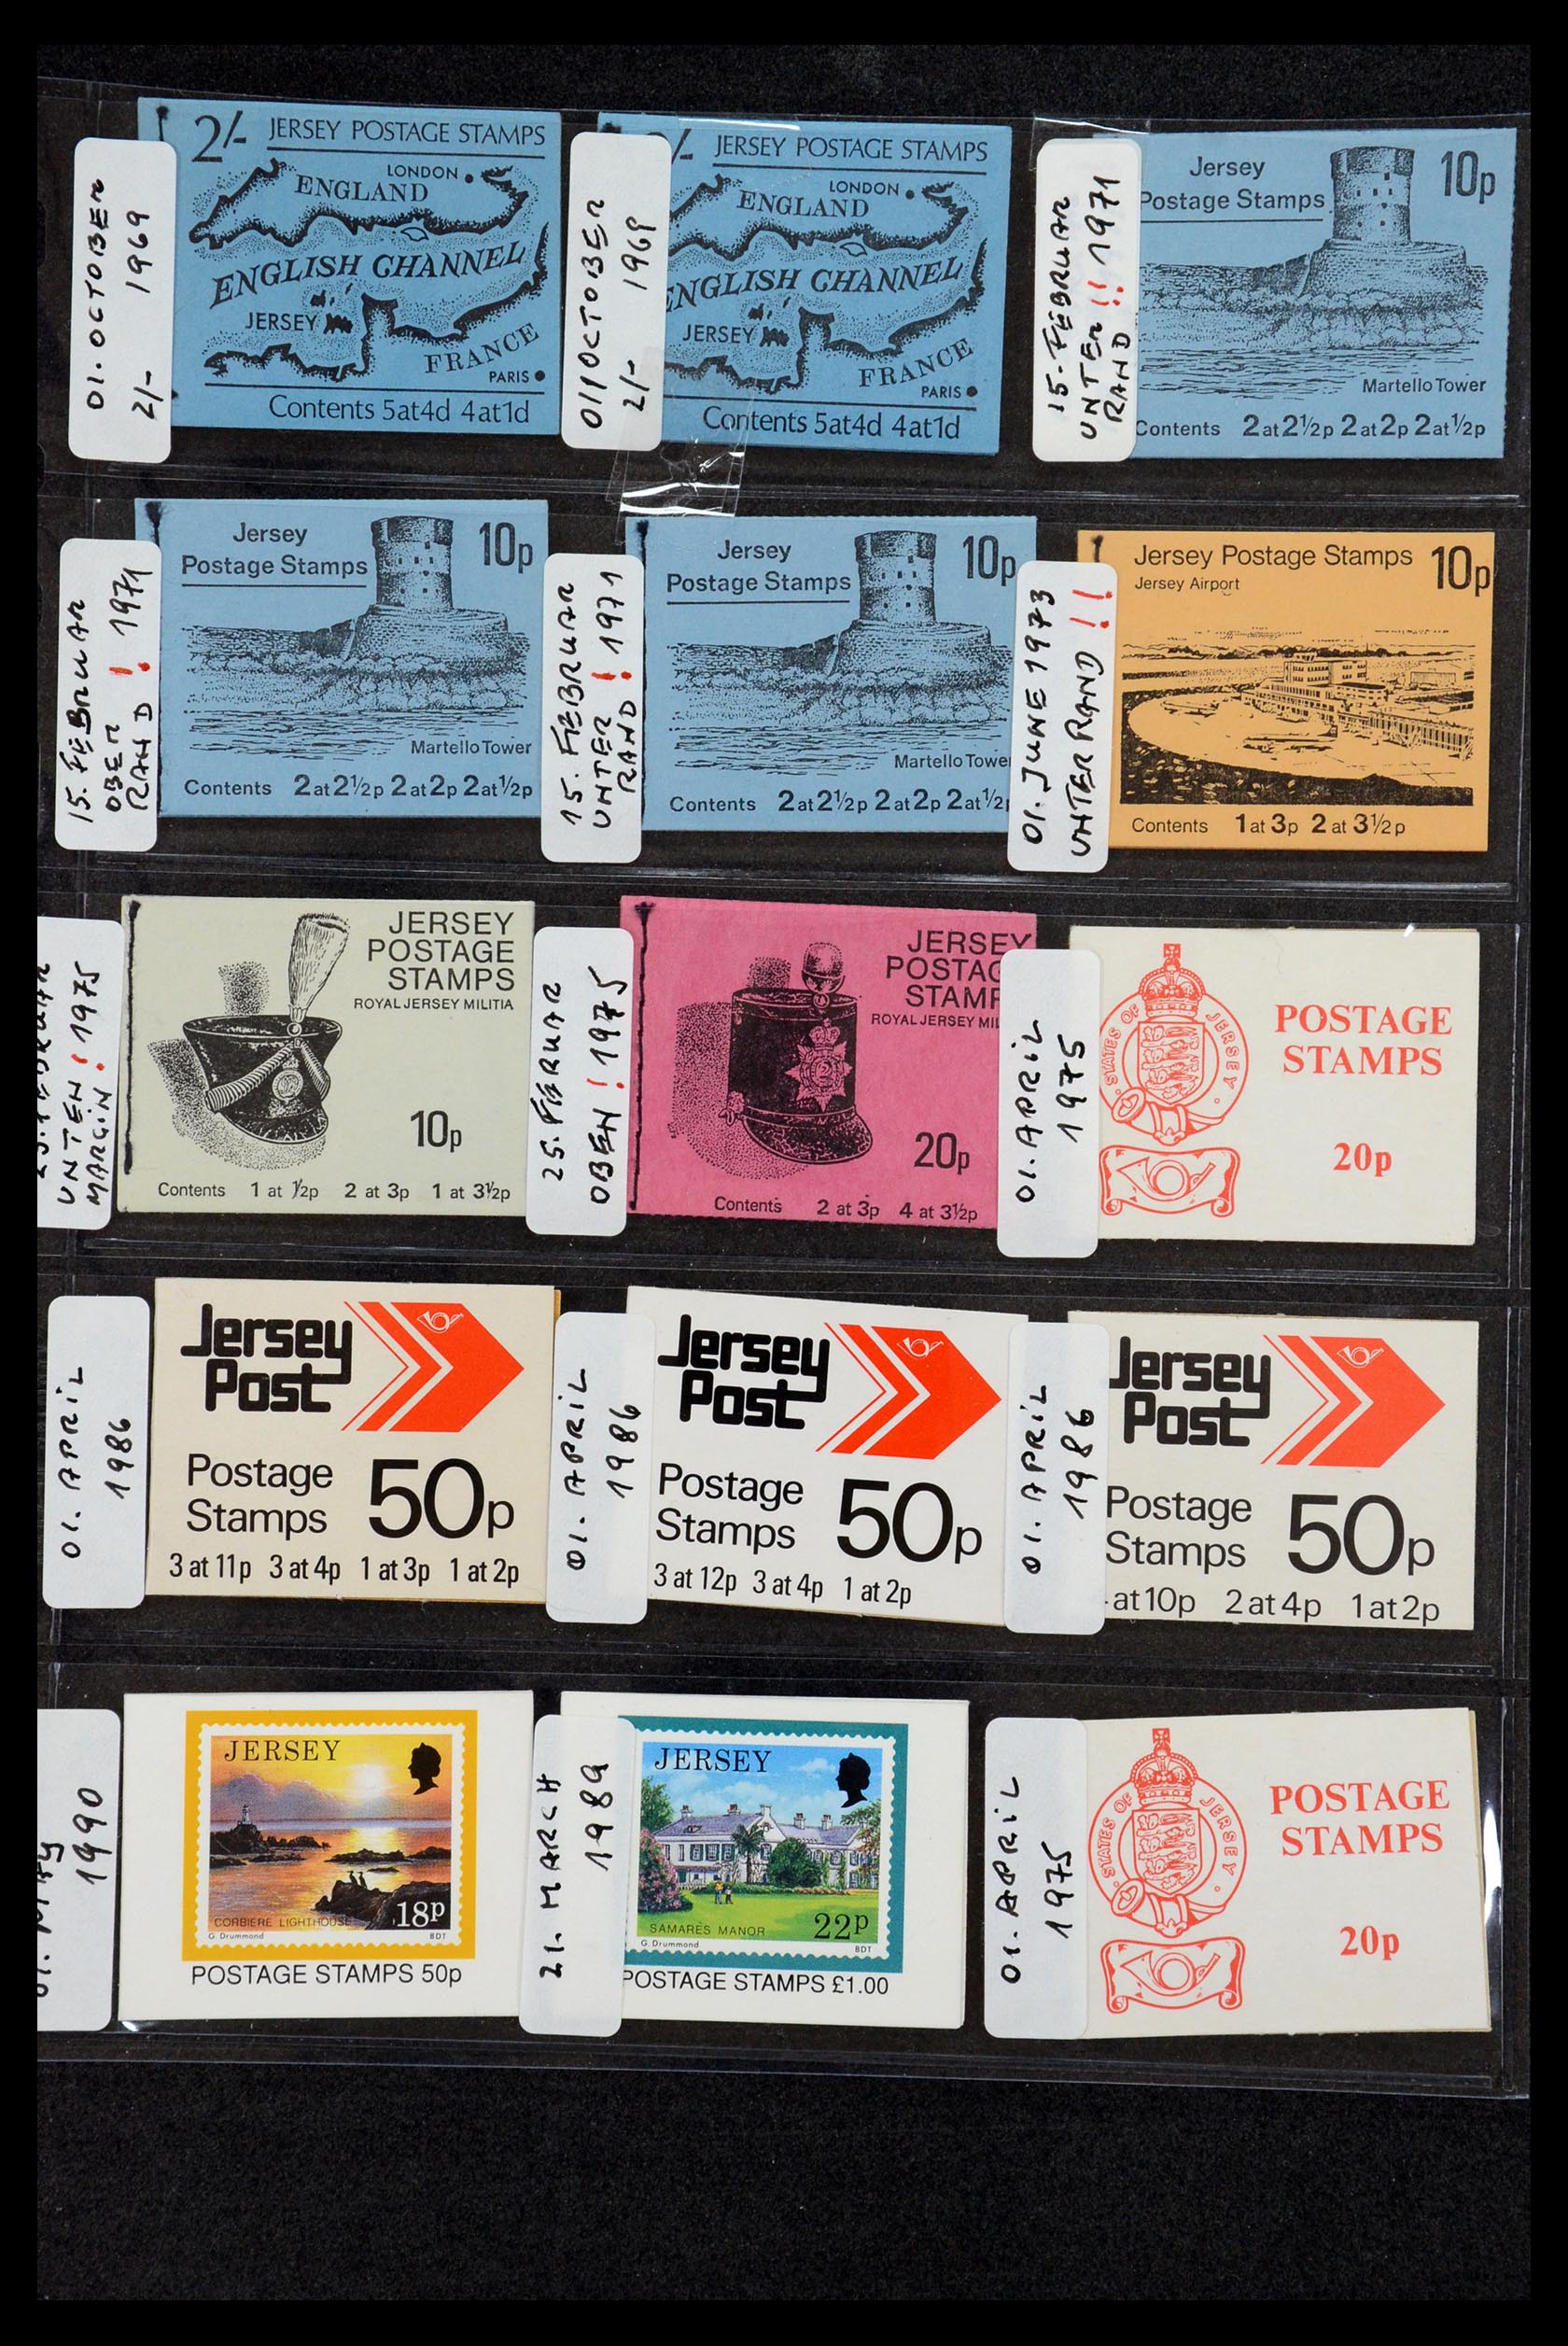 35979 033 - Stamp collection 35979 Jersey stamp booklets 1969-2015!